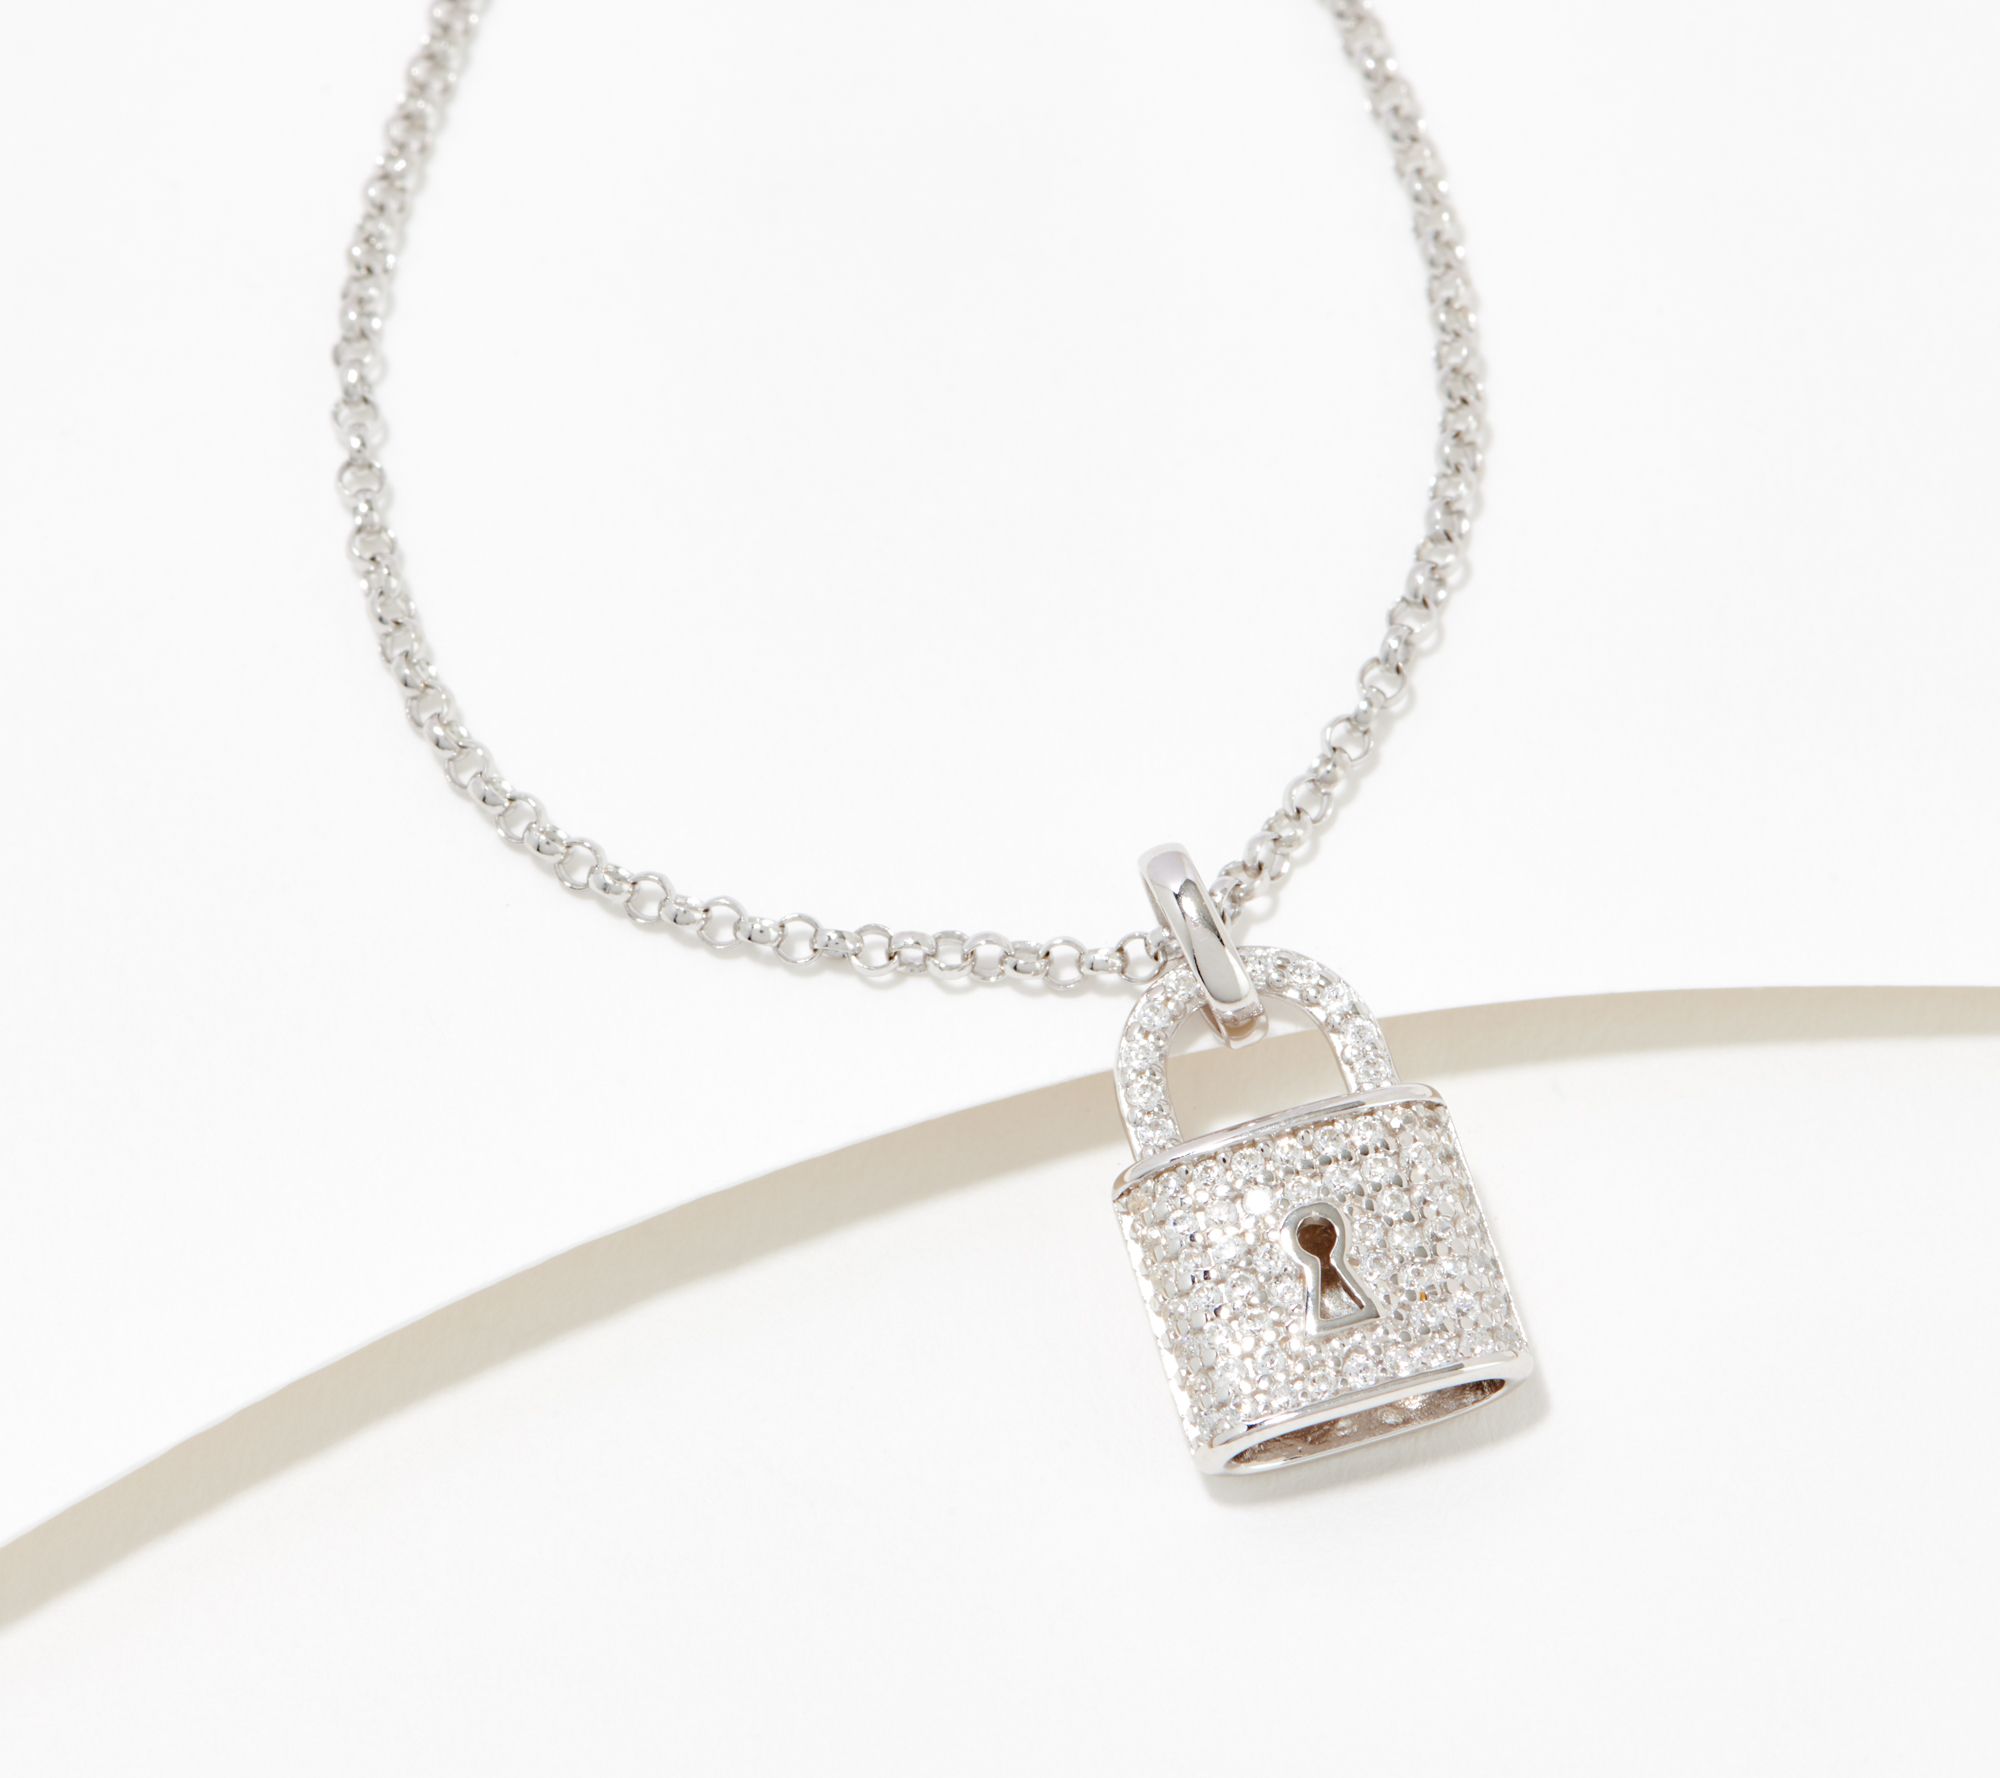 Clear CZ Padlock Necklace | Silver Plated Chain Pendant | Light Years